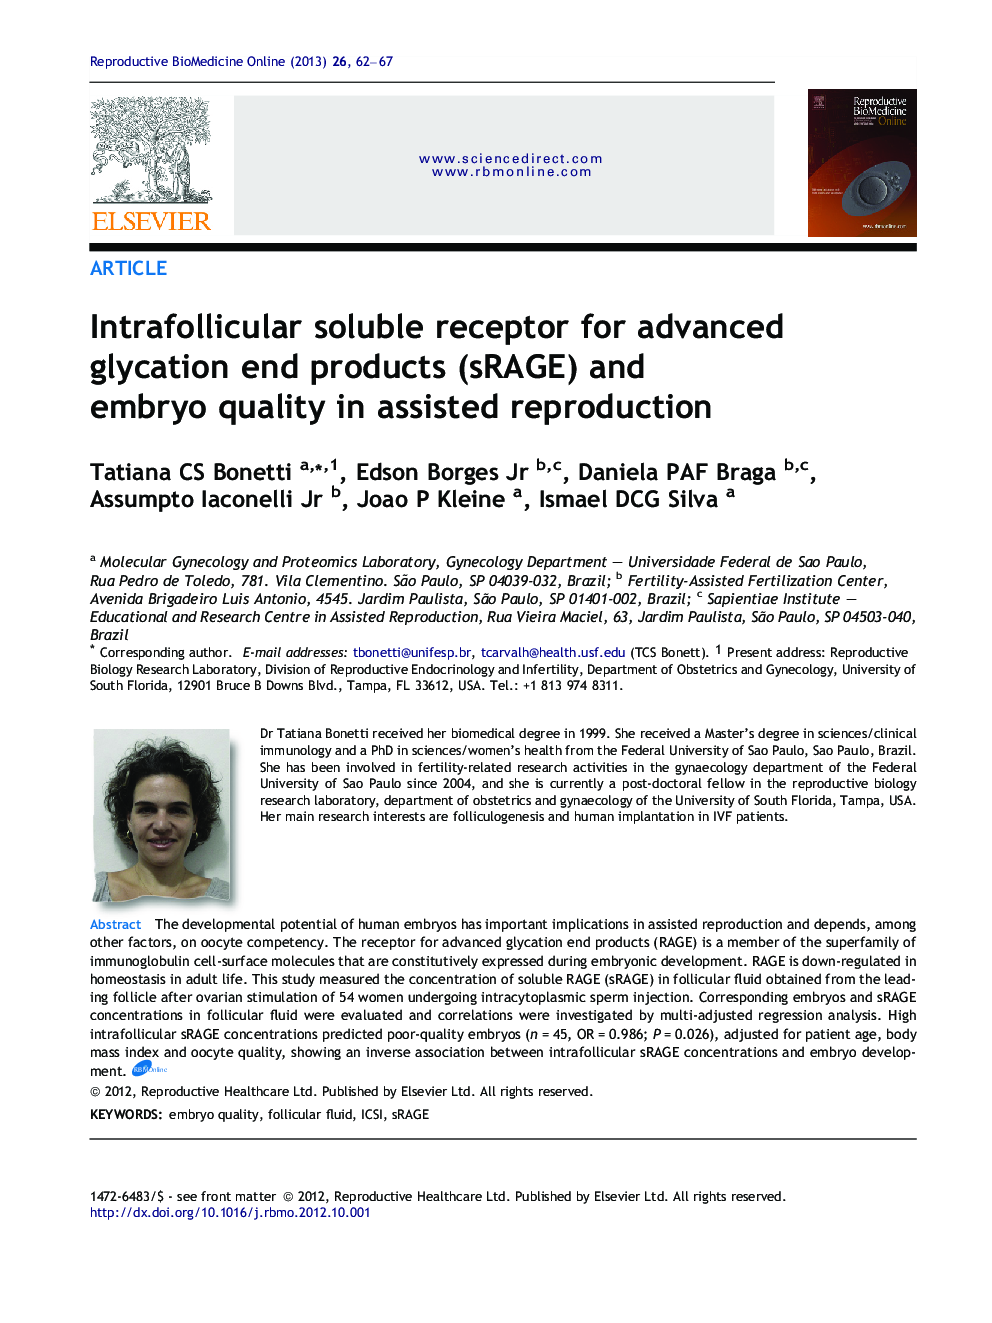 Intrafollicular soluble receptor for advanced glycation end products (sRAGE) and embryo quality in assisted reproduction 